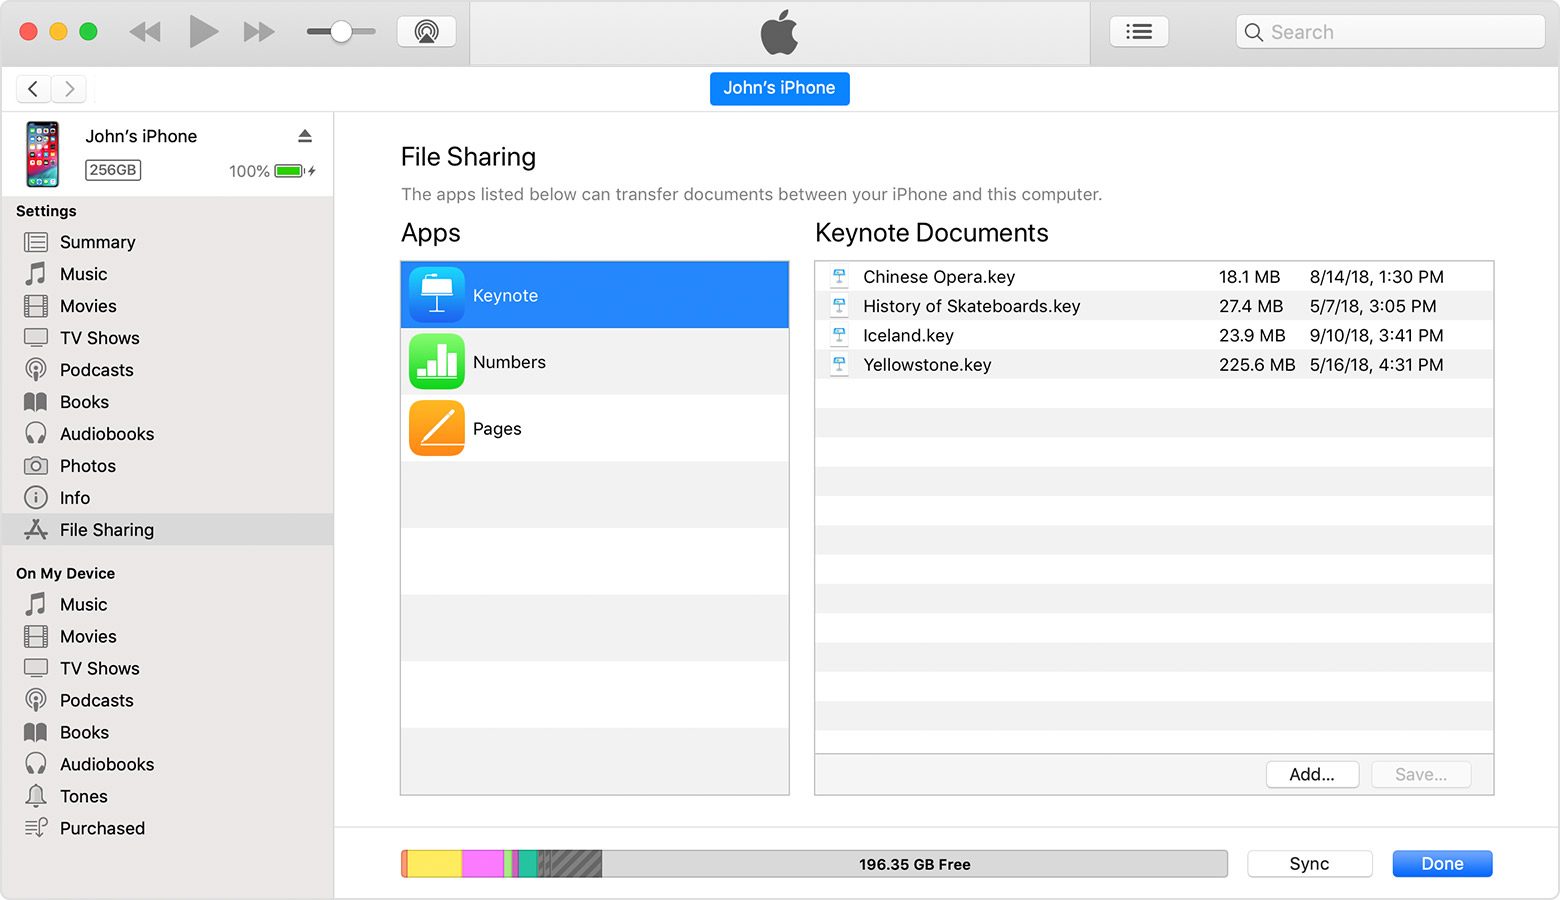 macos-mojave-itunes-12-9-file-sharing-apps-documents-8586474